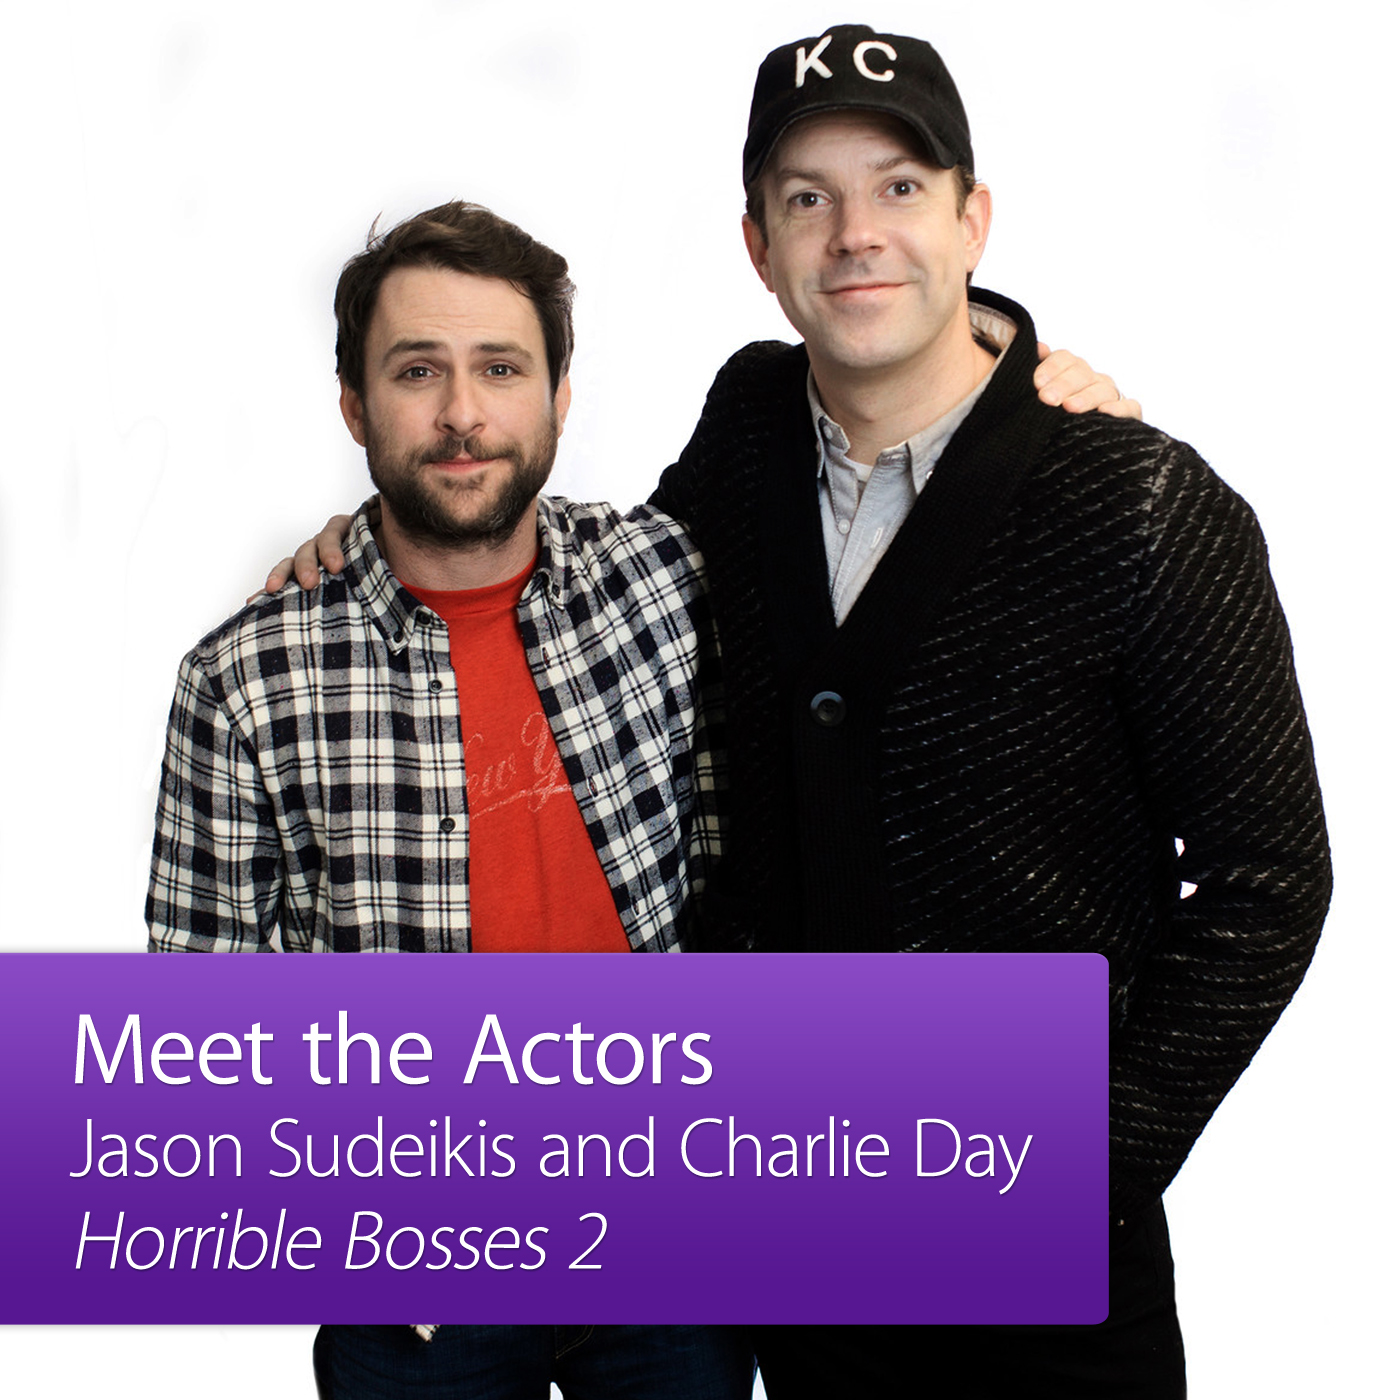 Jason Sudeikis and Charlie Day: Meet the Actor